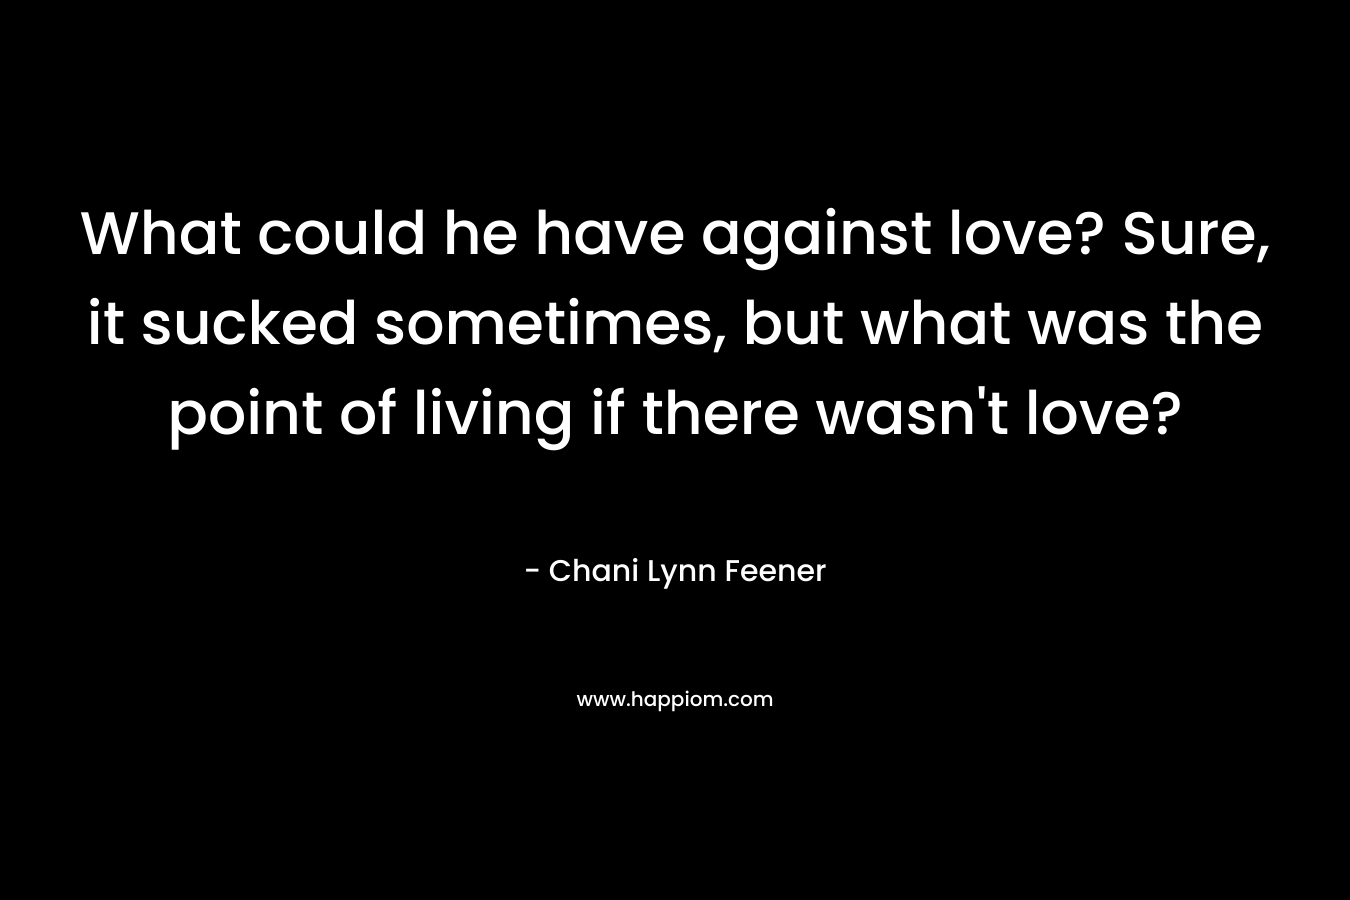 What could he have against love? Sure, it sucked sometimes, but what was the point of living if there wasn’t love? – Chani Lynn Feener